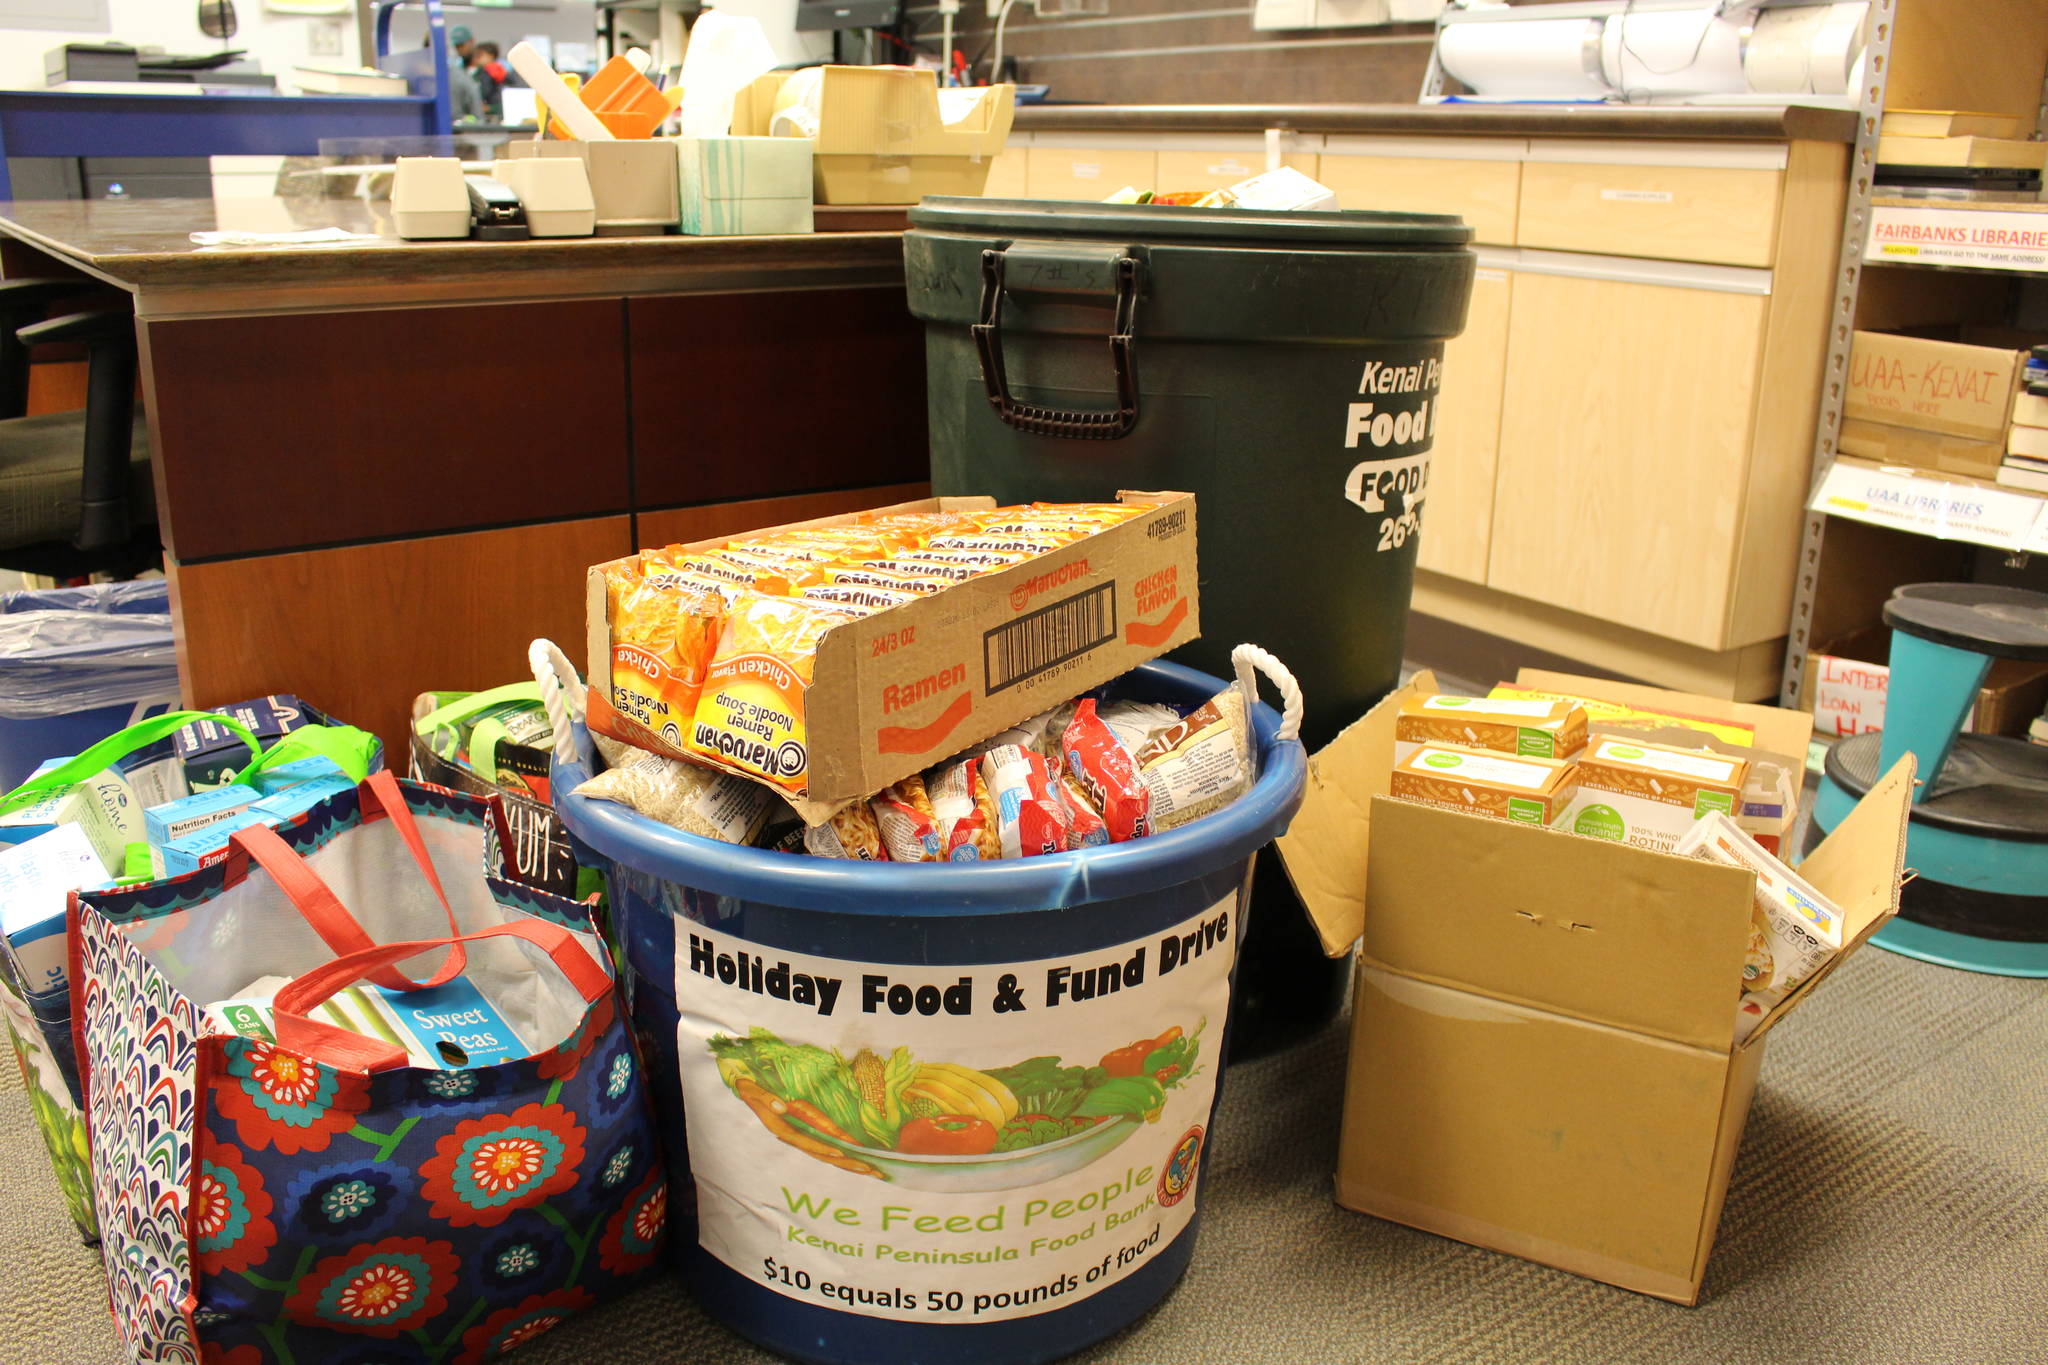 Food to be donated to the Kenai Peninsula Food Bank can be seen here at the Soldotna Public Library on Sept. 20, 2019. (Photo by Brian Mazurek/Peninsula Clarion)